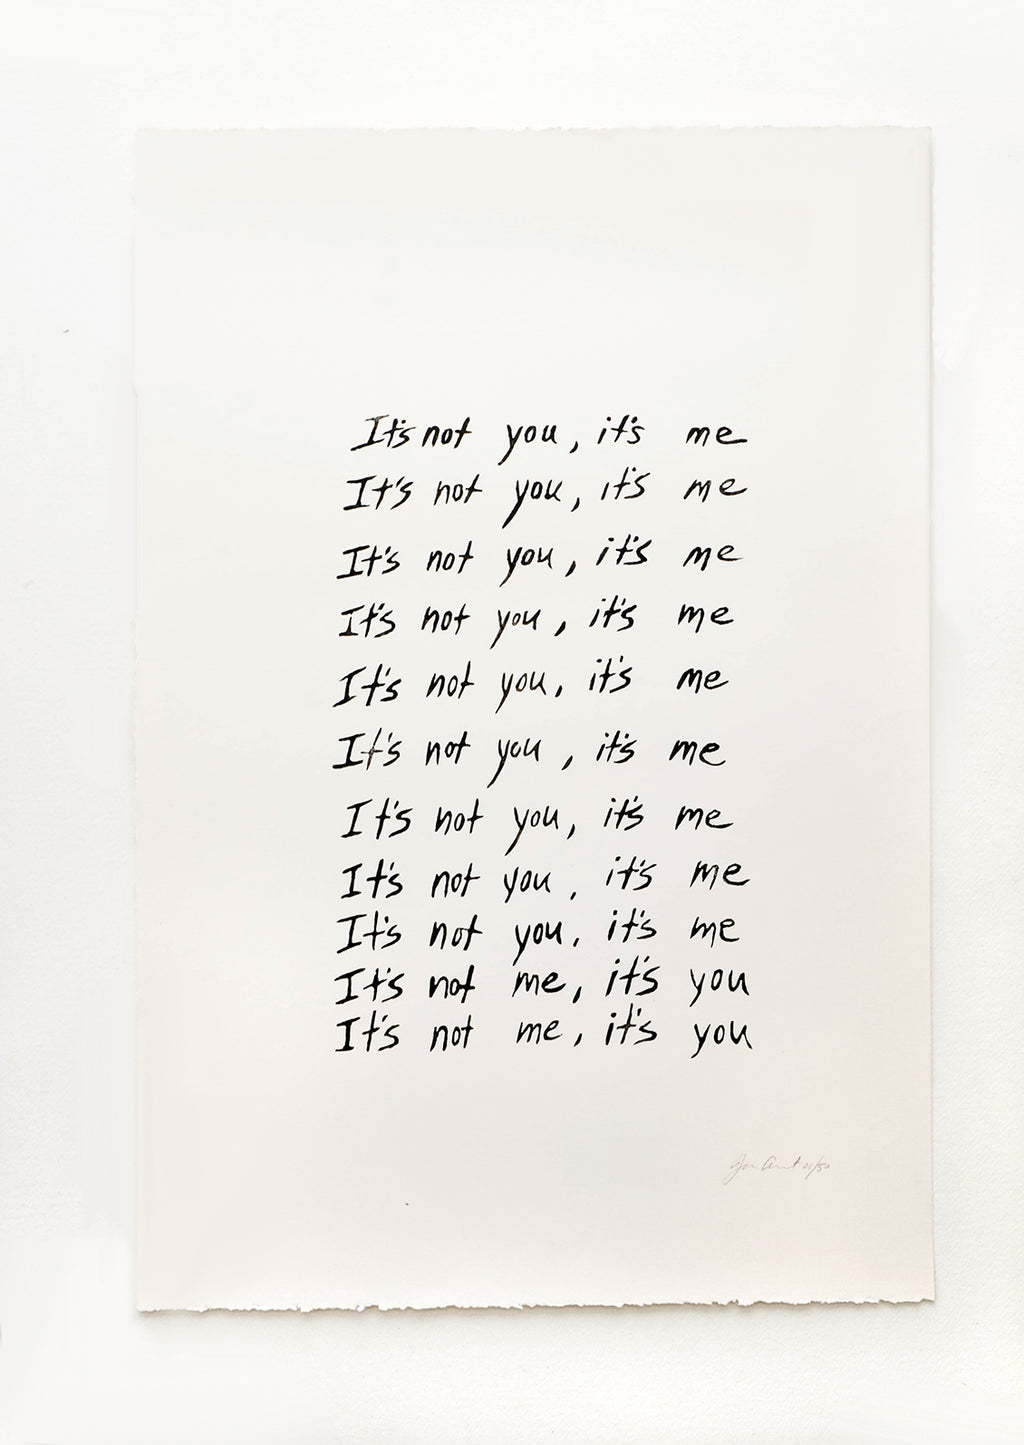 1: Art print featuring repeated rows of handwritten text, starting with "It's not you, it's me" and ending with "It's not me, it's you"